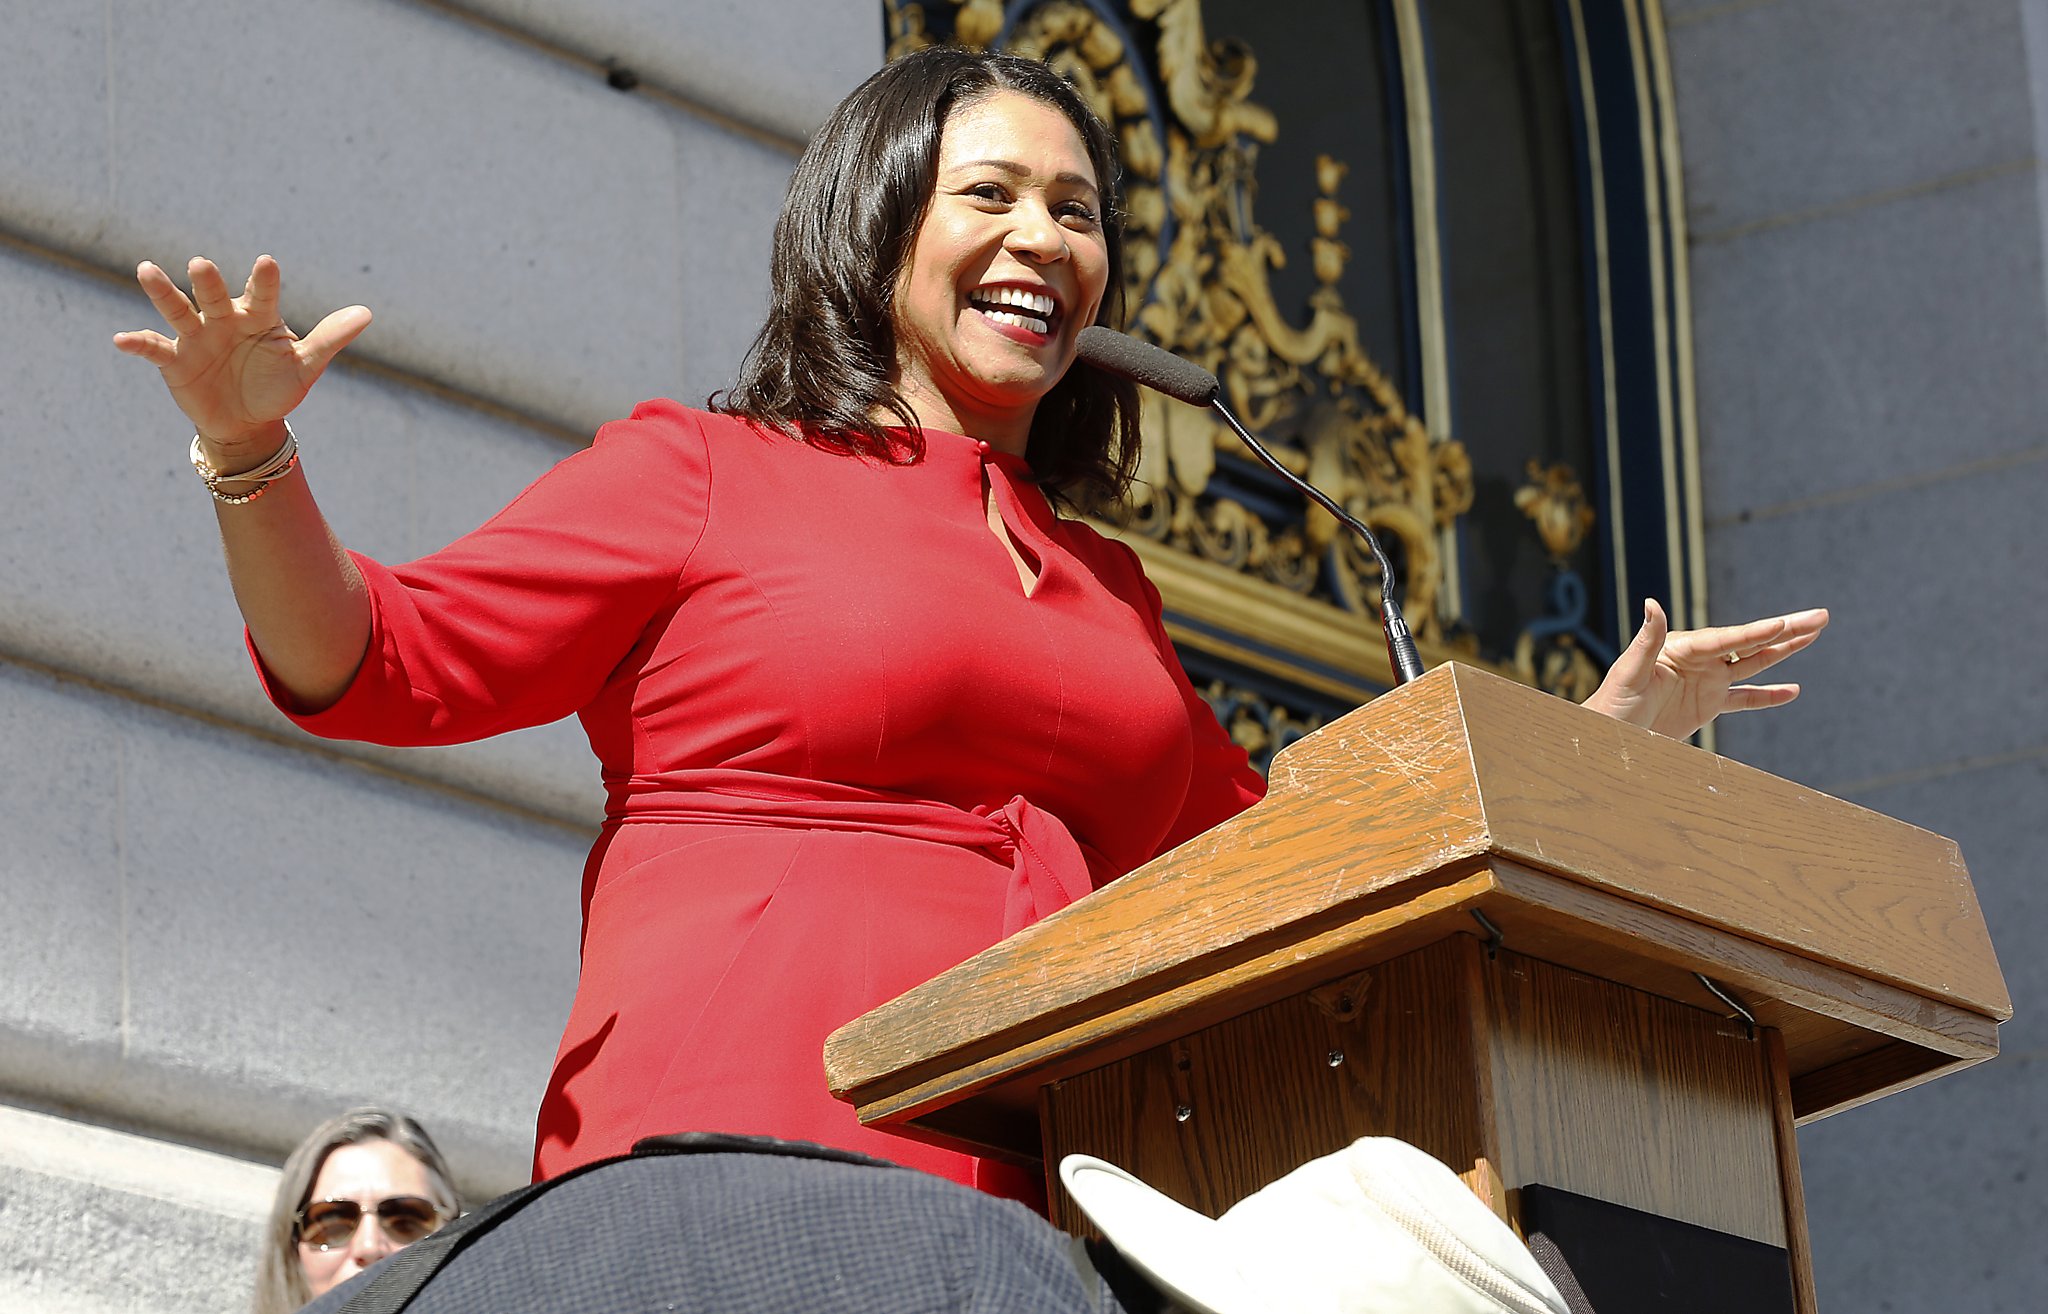 London Breed uses new clout to help old friend - SFChronicle.com2048 x 1314